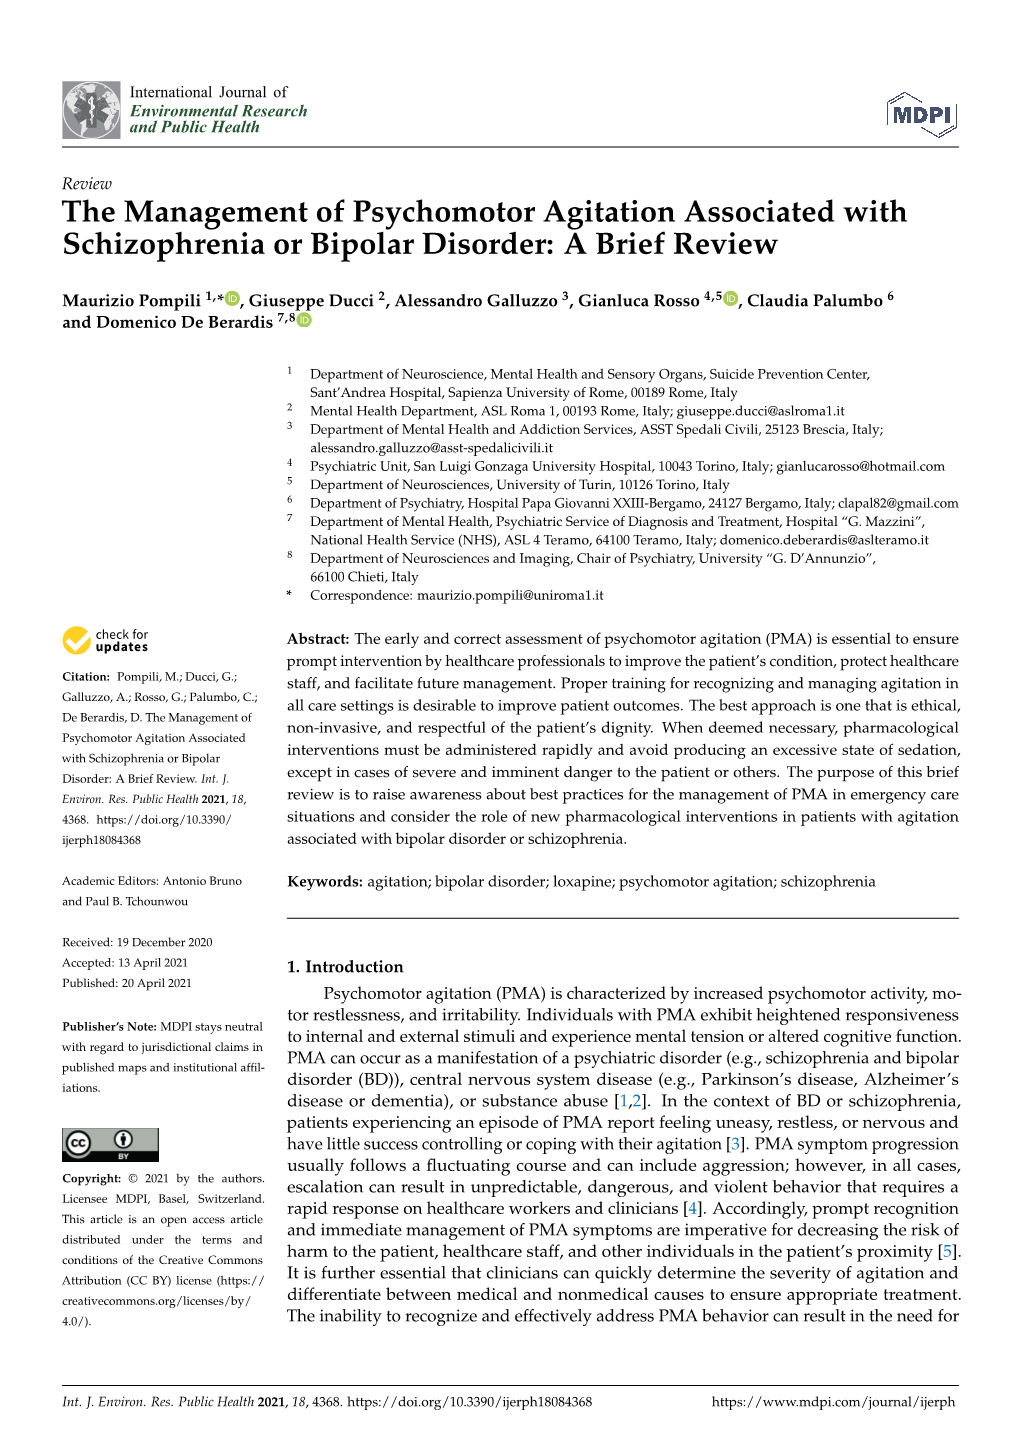 The Management of Psychomotor Agitation Associated with Schizophrenia Or Bipolar Disorder: a Brief Review